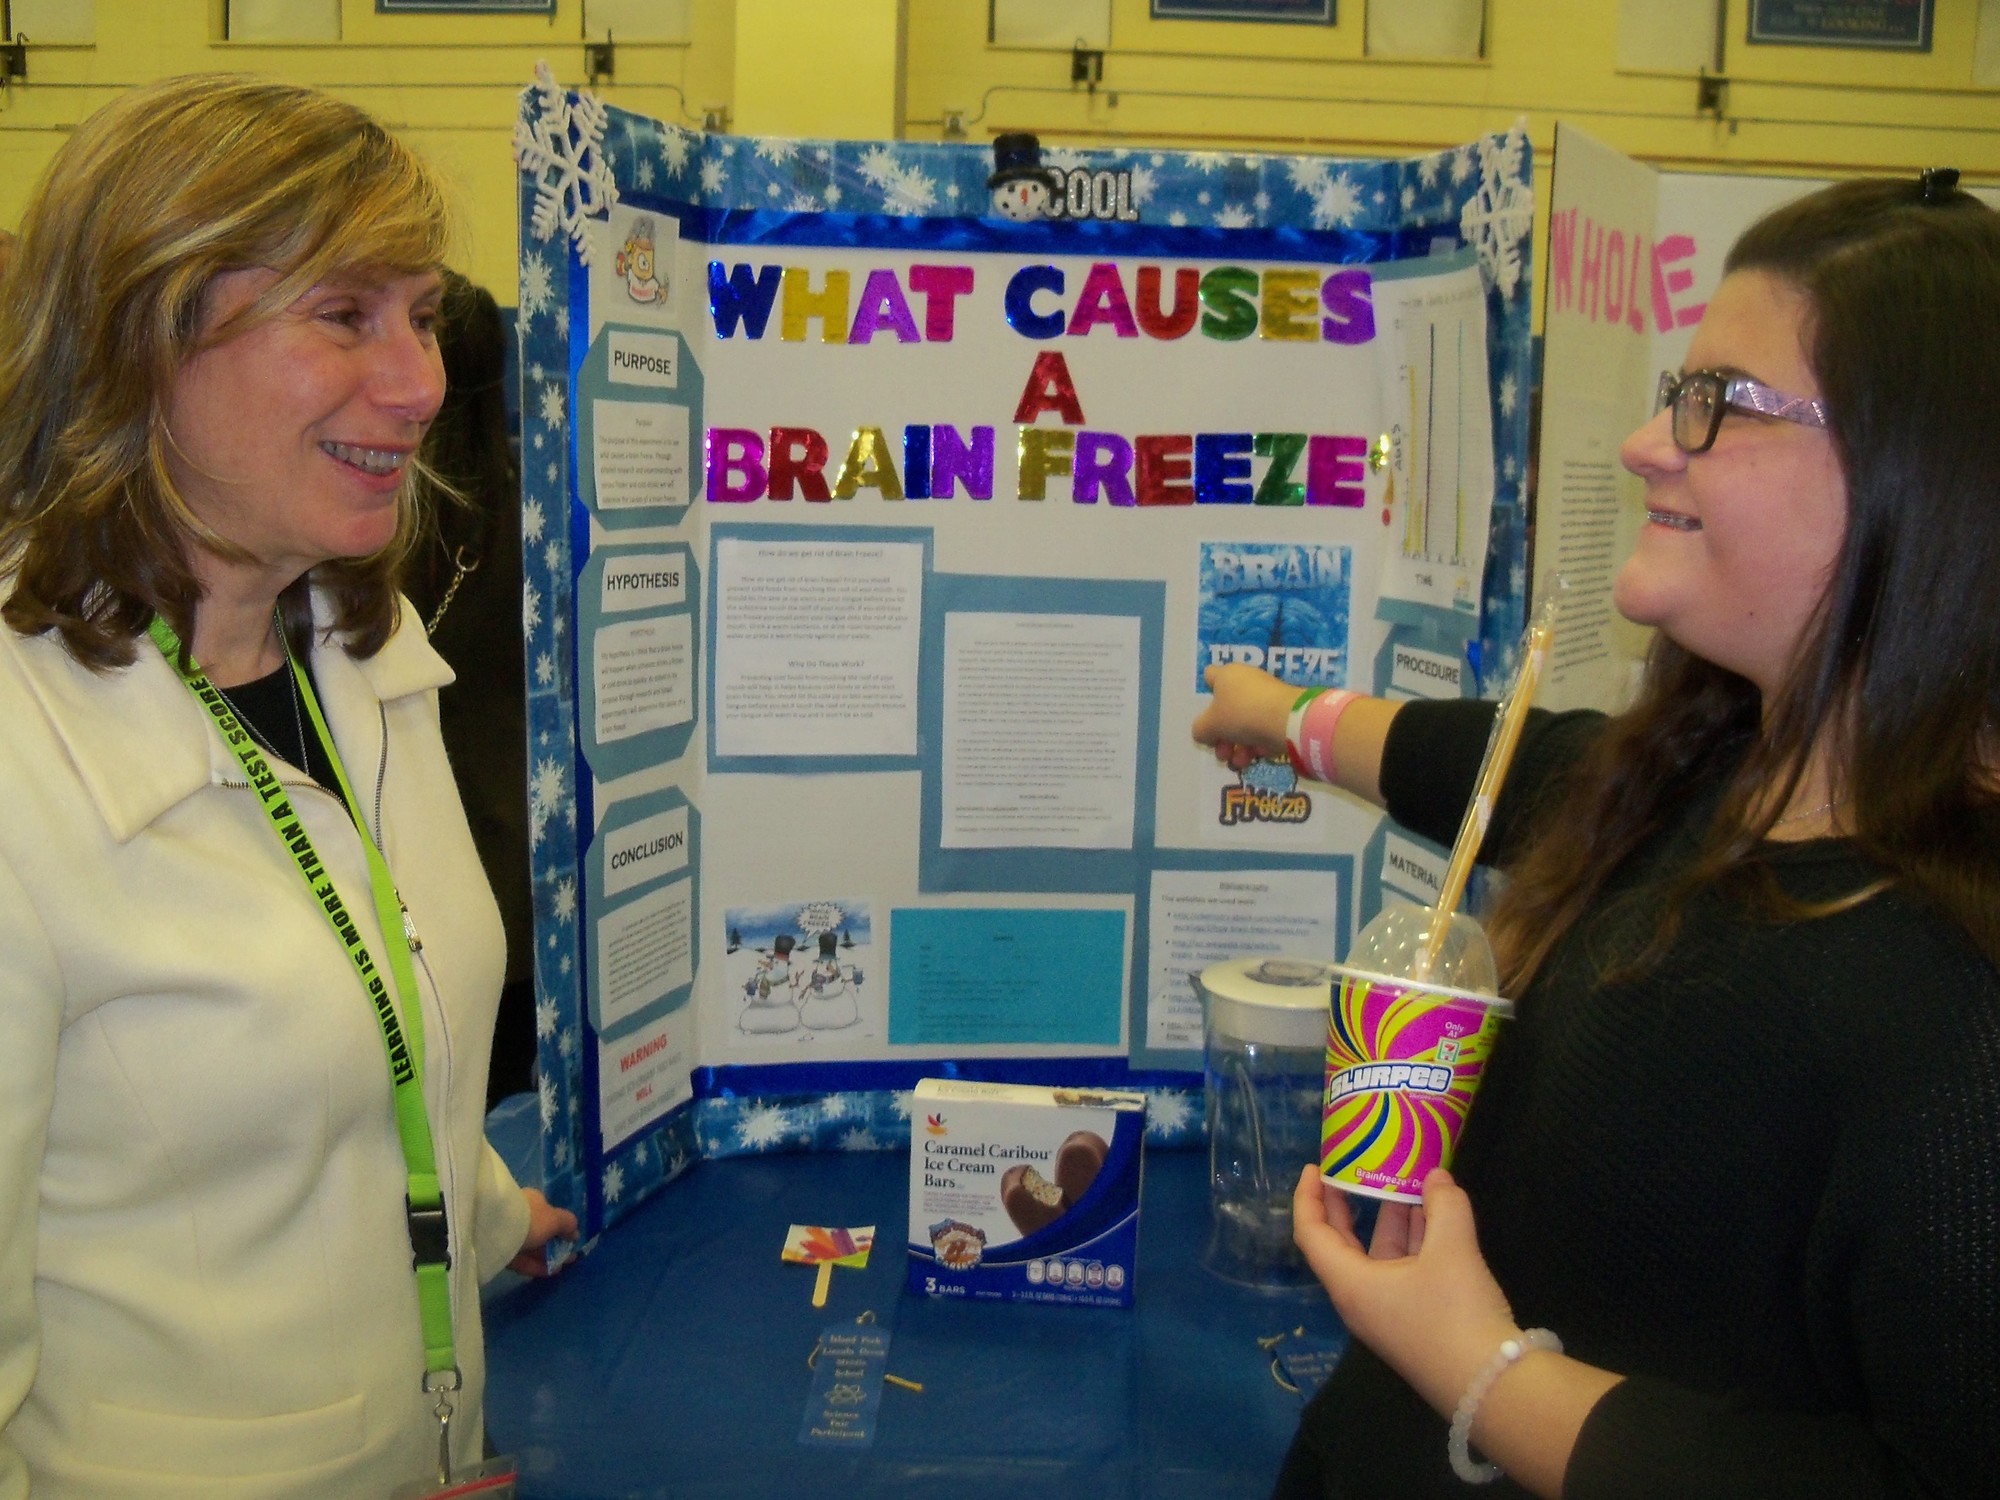 Jenna DeBellis learned the cause of “Brain Freeze” and answered questions about her methodology from Science Teacher Sheryl Waxberg.